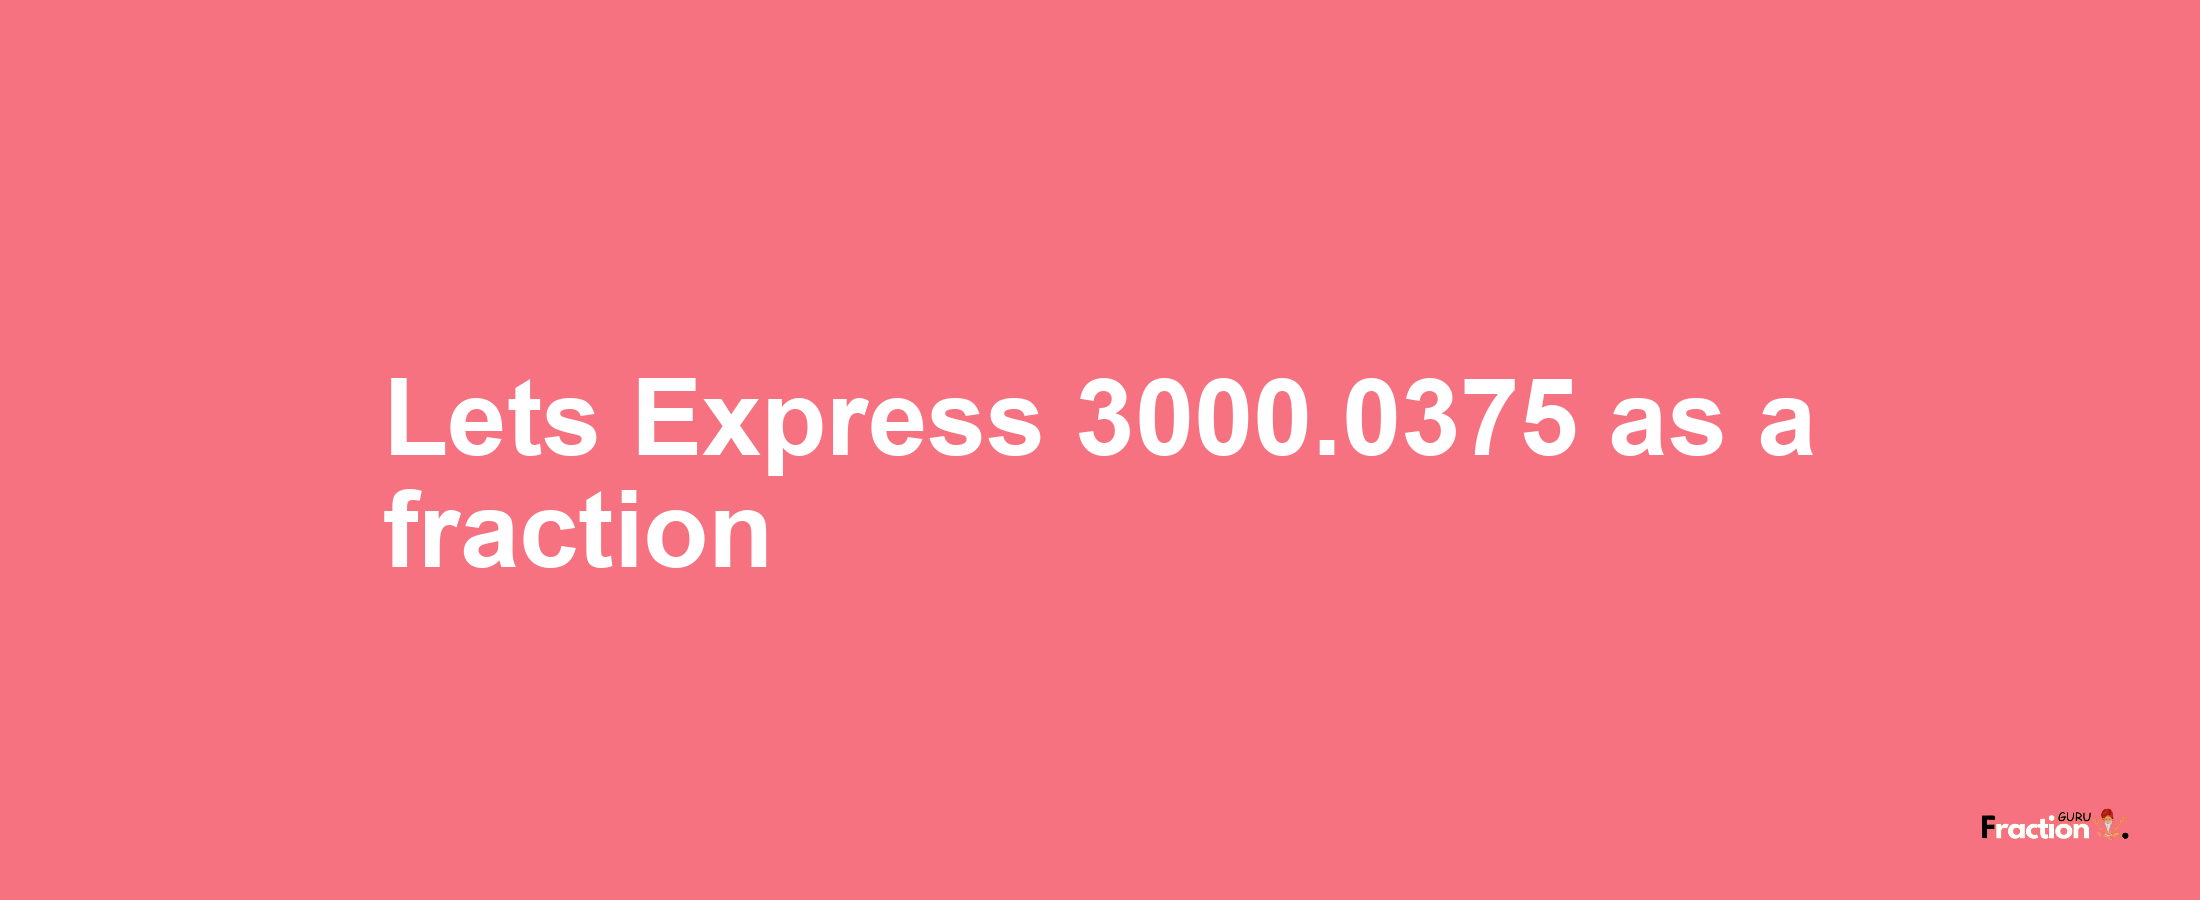 Lets Express 3000.0375 as afraction